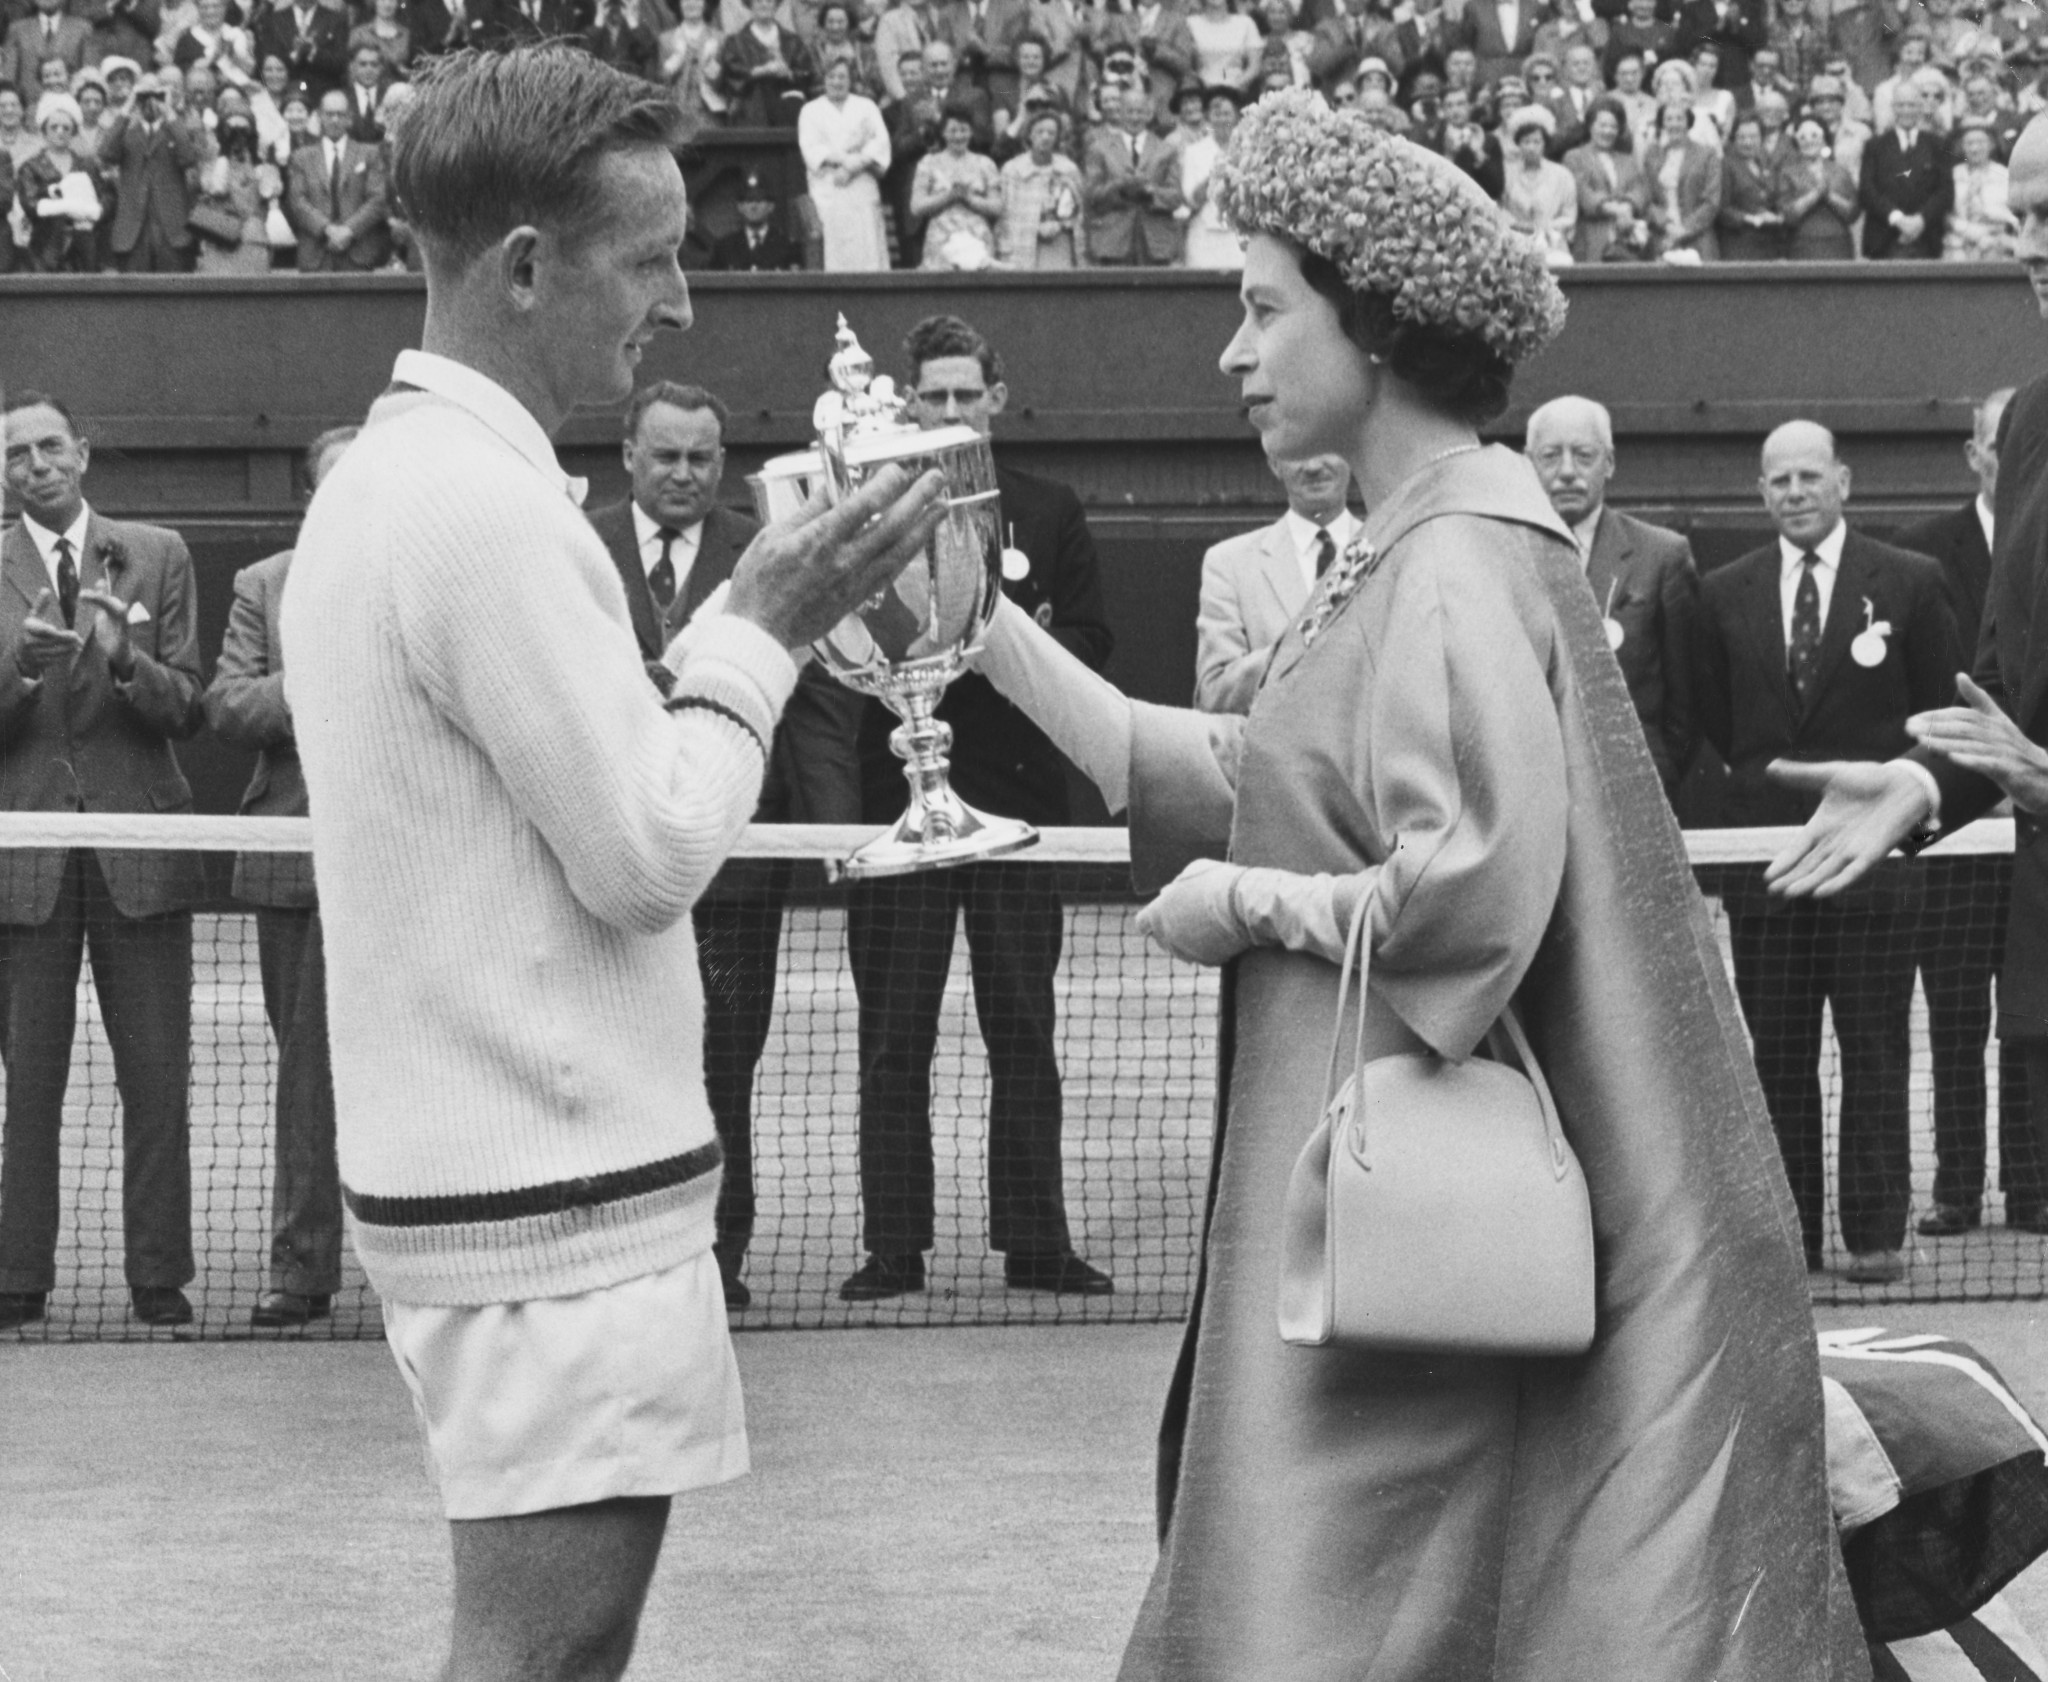 Rod Laver, left, received the Wimbledon men's singles trophy from Queen Elizabeth II in 1962 before completing his first calendar Grand Slam ©Getty Images